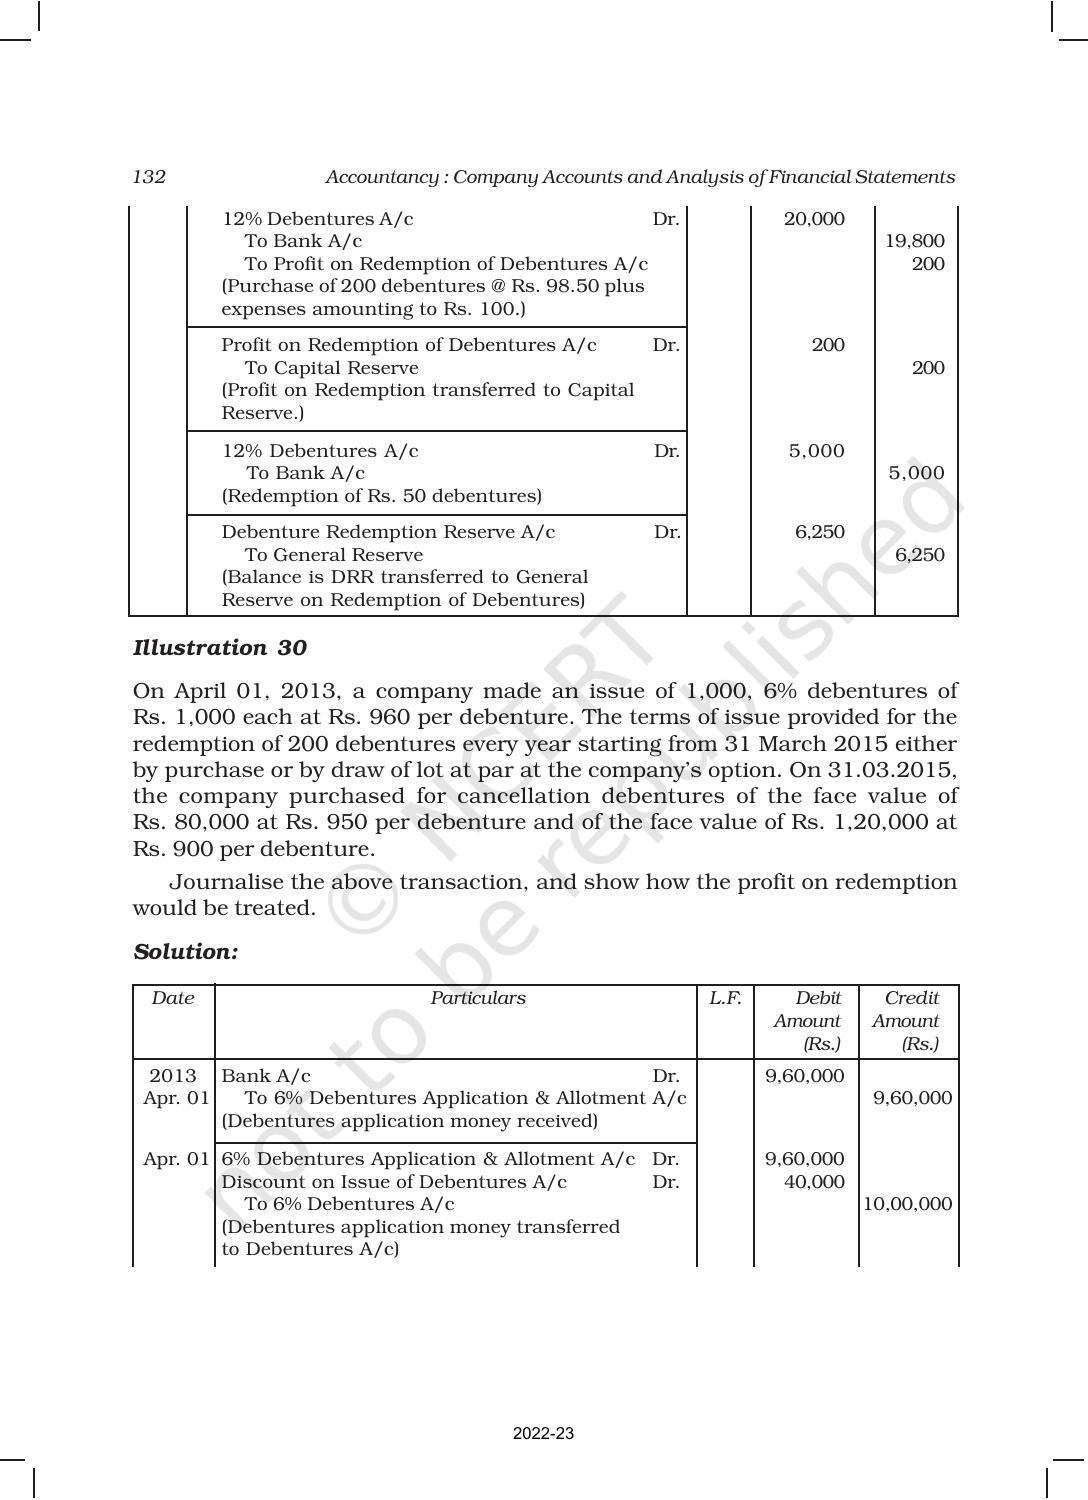 NCERT Book for Class 12 Accountancy Part II Chapter 1 Issue and Redemption of Debentures - Page 58